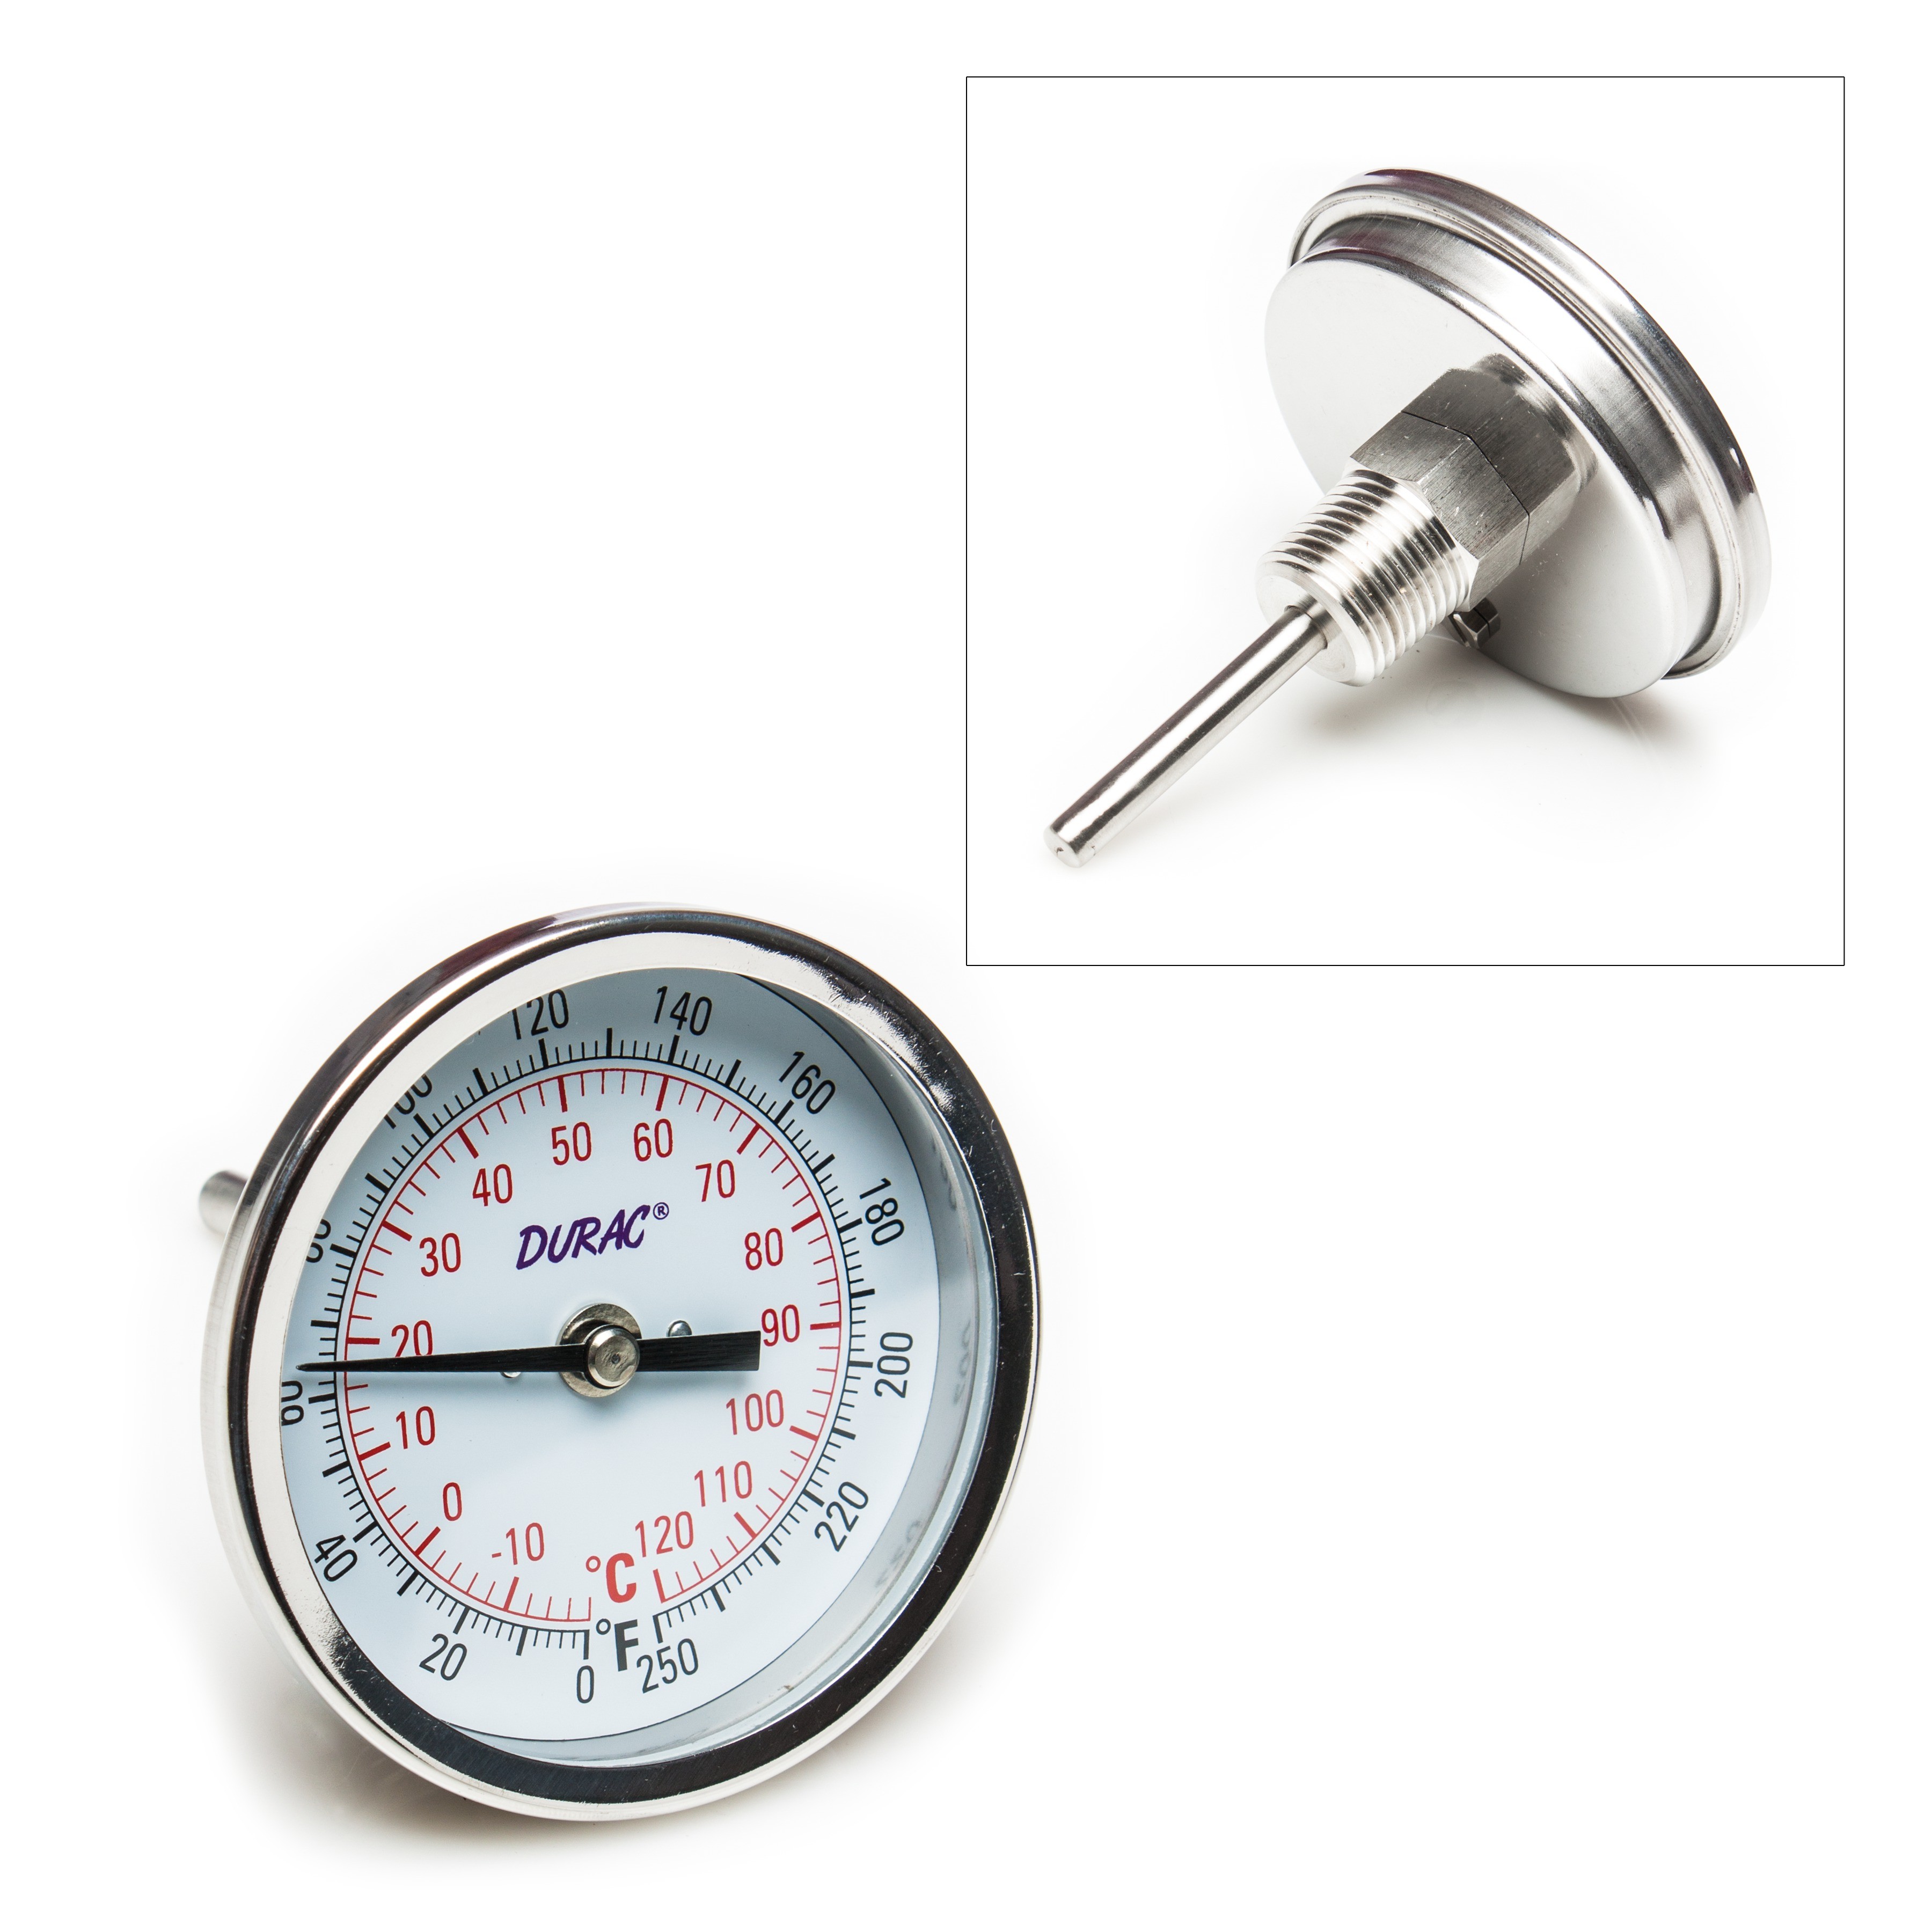 SP Bel-Art, H-B DURAC Bi-Metallic Dial Thermometer; -20 to 120C (0 to 250F), 1/2 in. NPT Threaded Connection, 75mm Dial